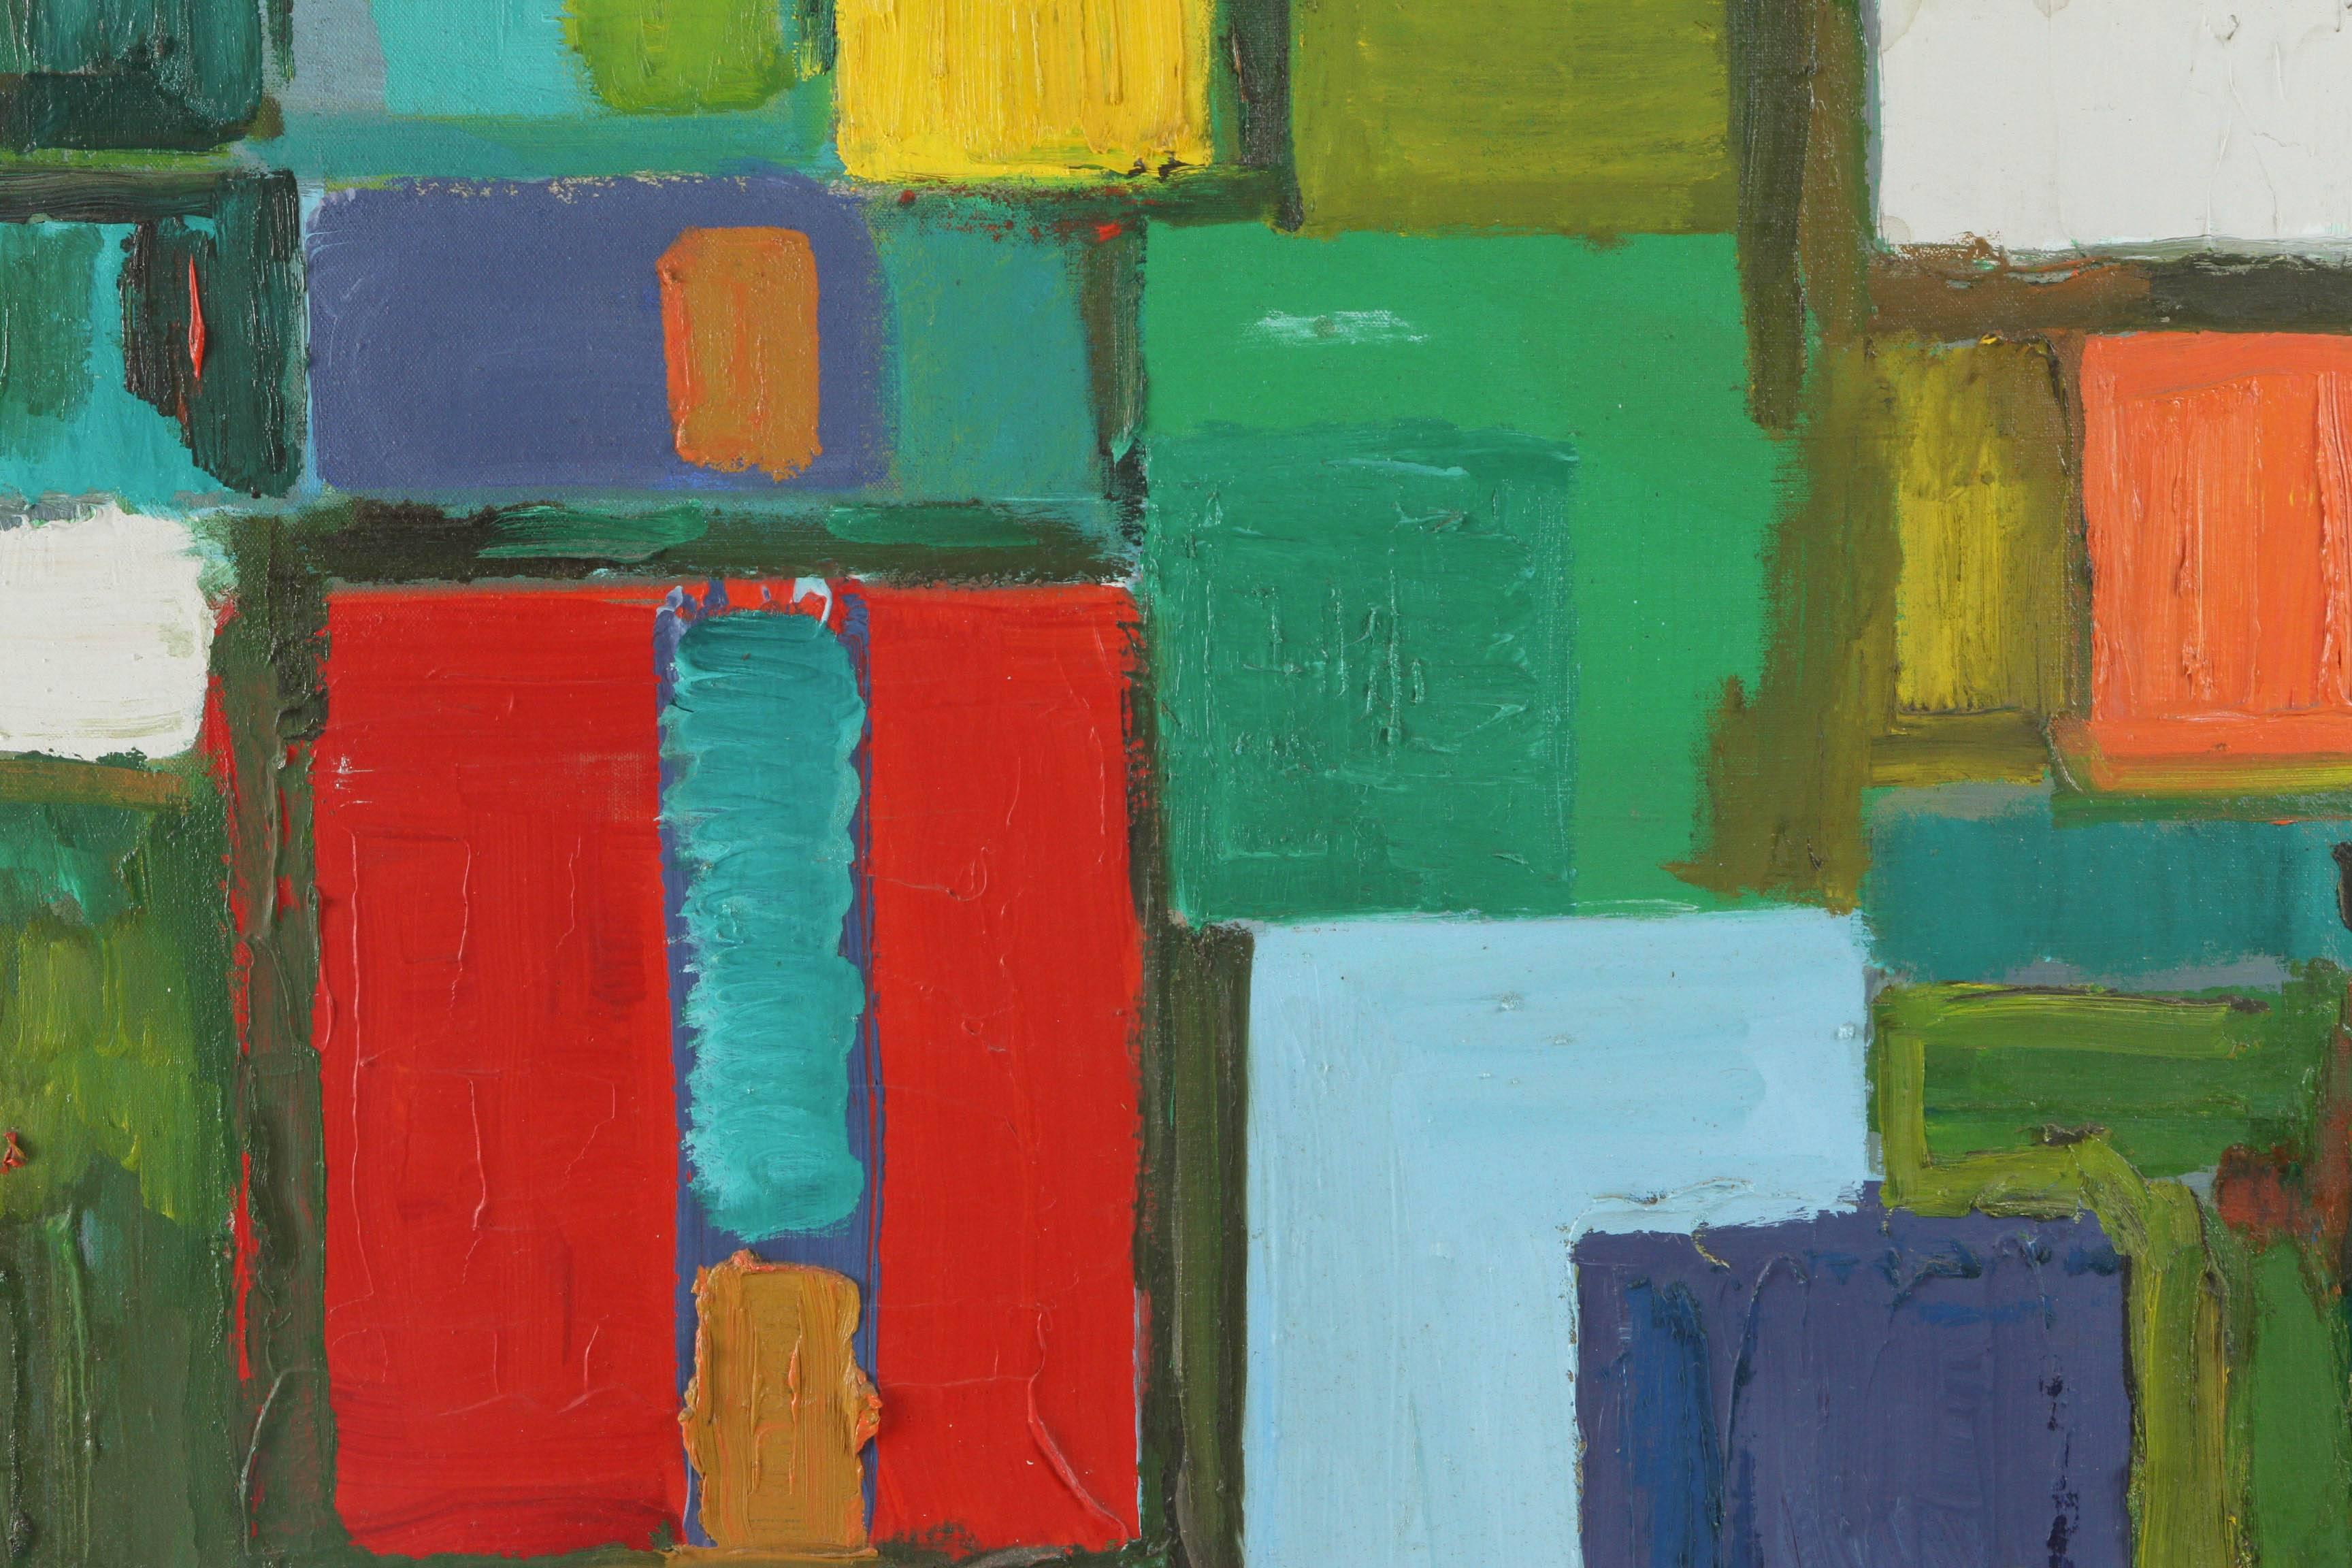 Black framed rectangular green, red and yellow geometric abstract painting.